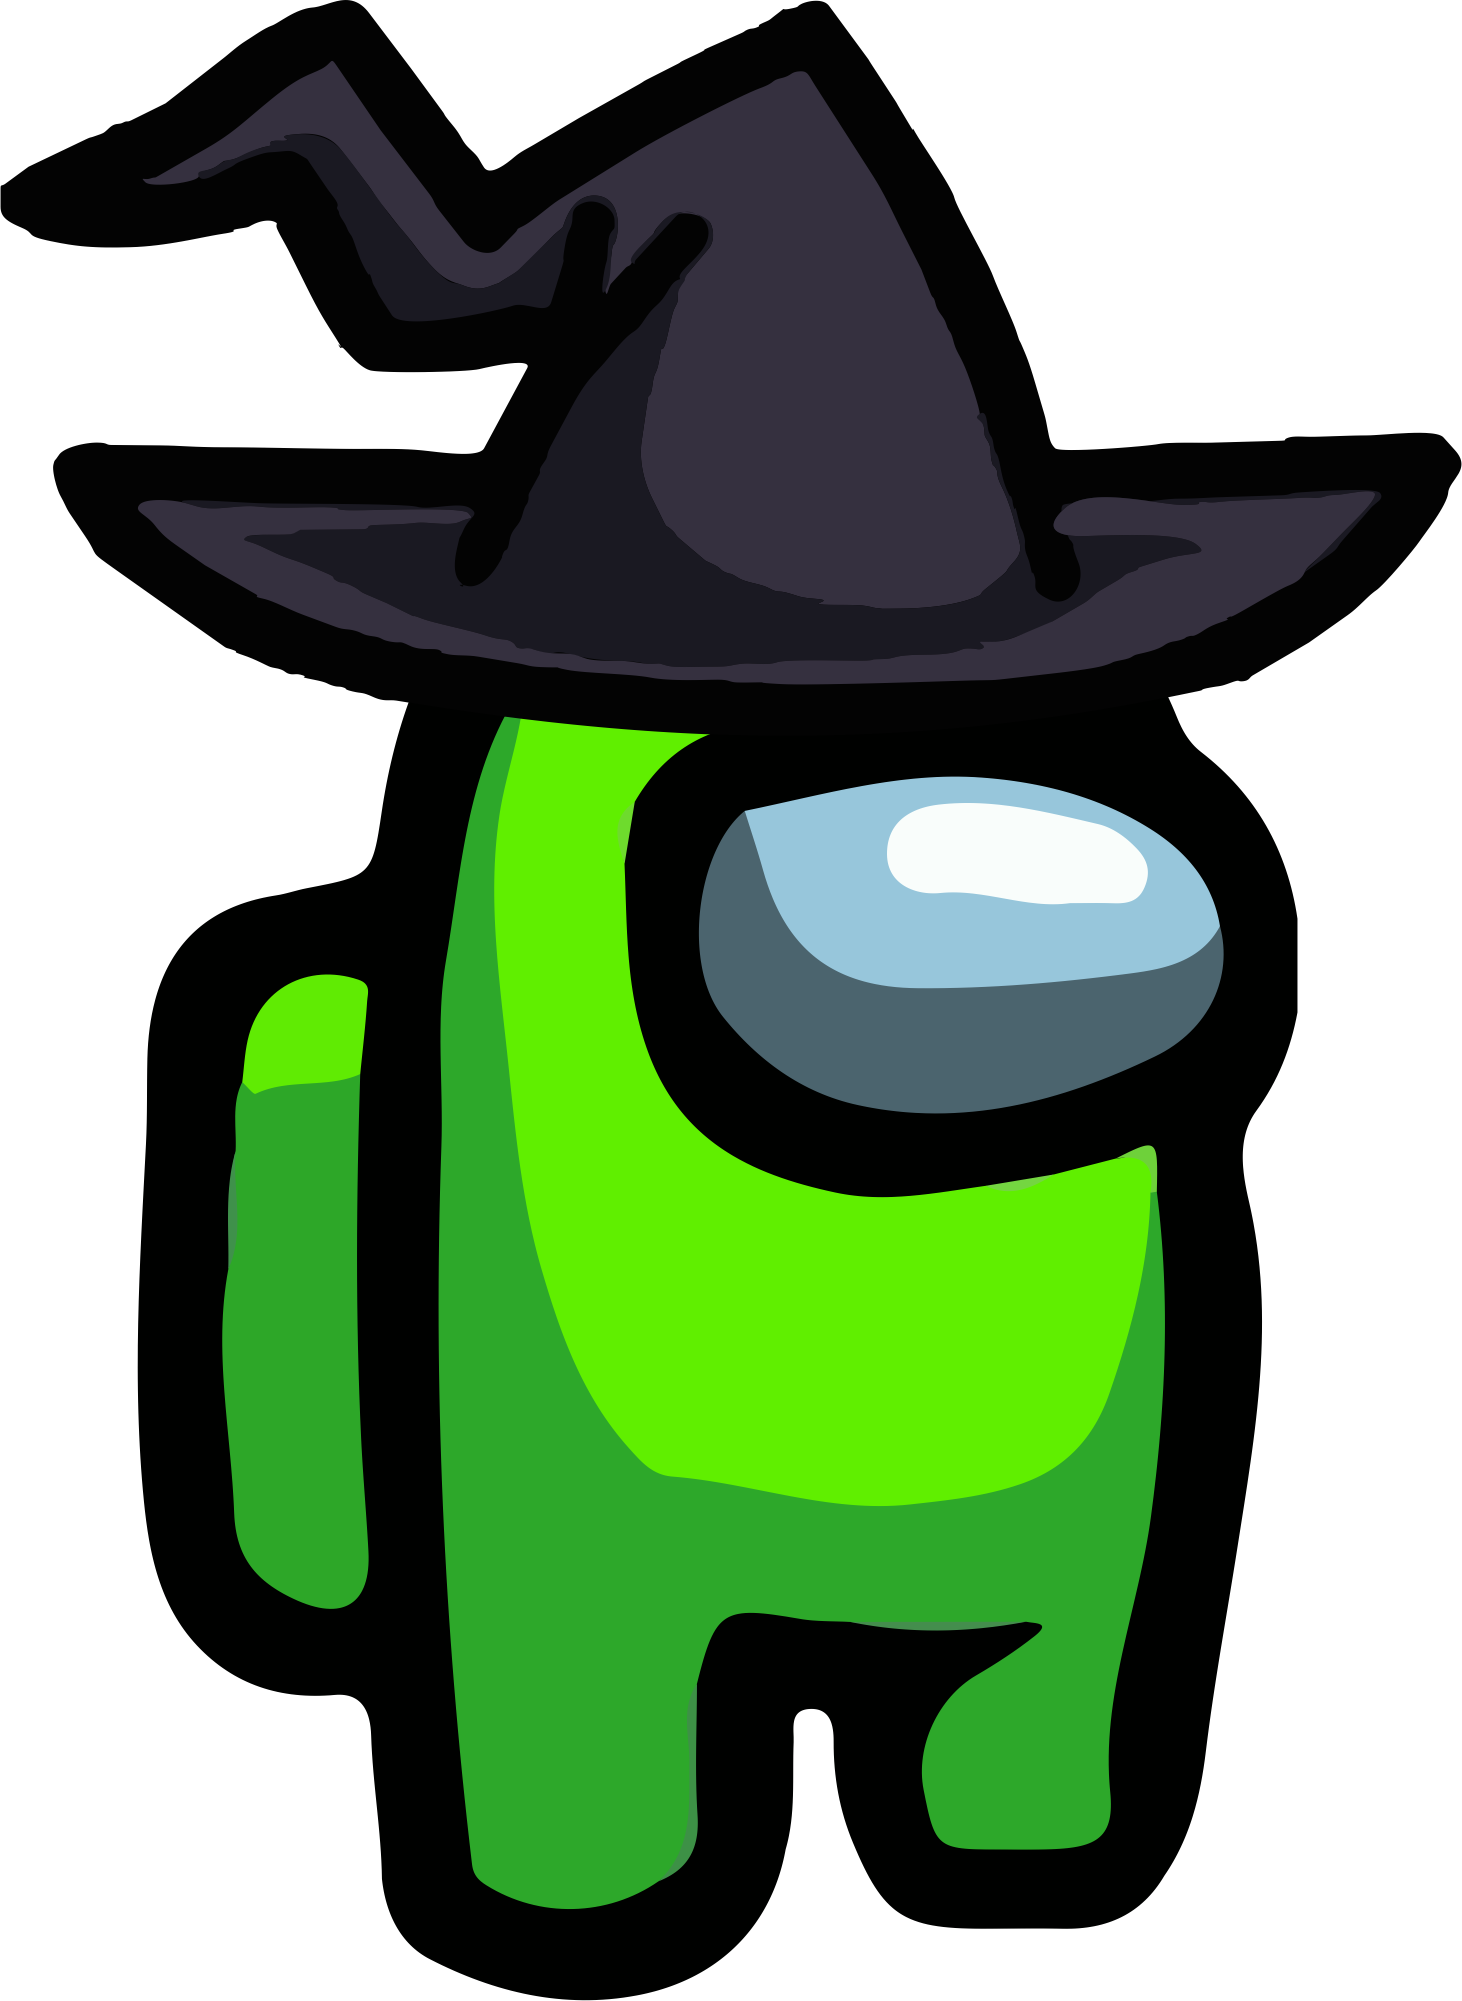 among-us-lime-witch-hat-png-01